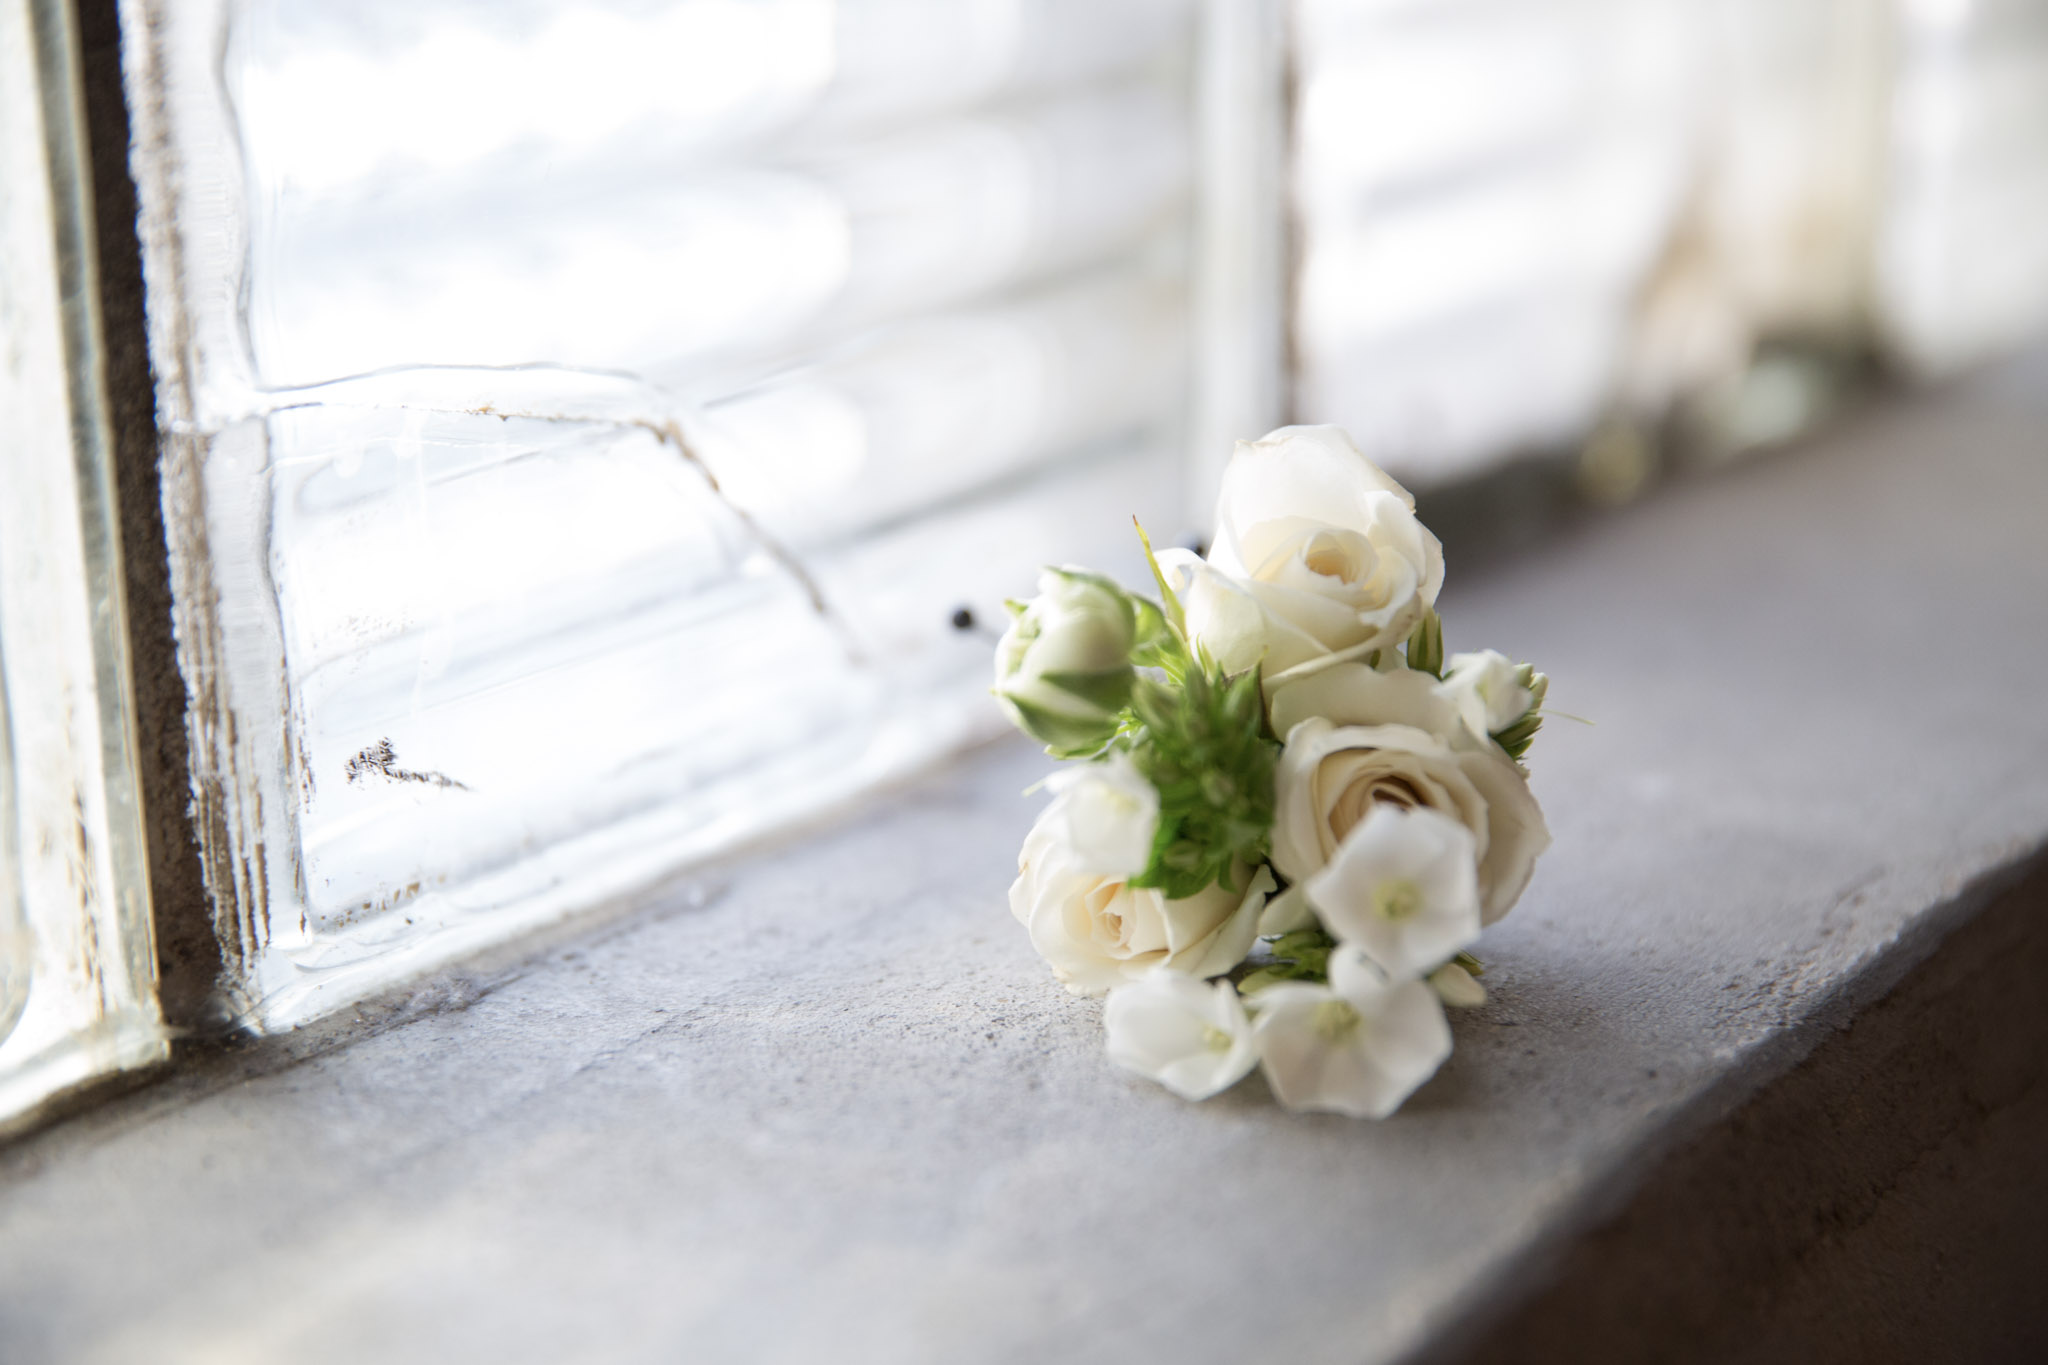 Kansas_City_Small_Wedding_Venue_Elope_Intimate_Ceremony_Budget_Affordable_Summer_Flowers_569A8578-5.jpg